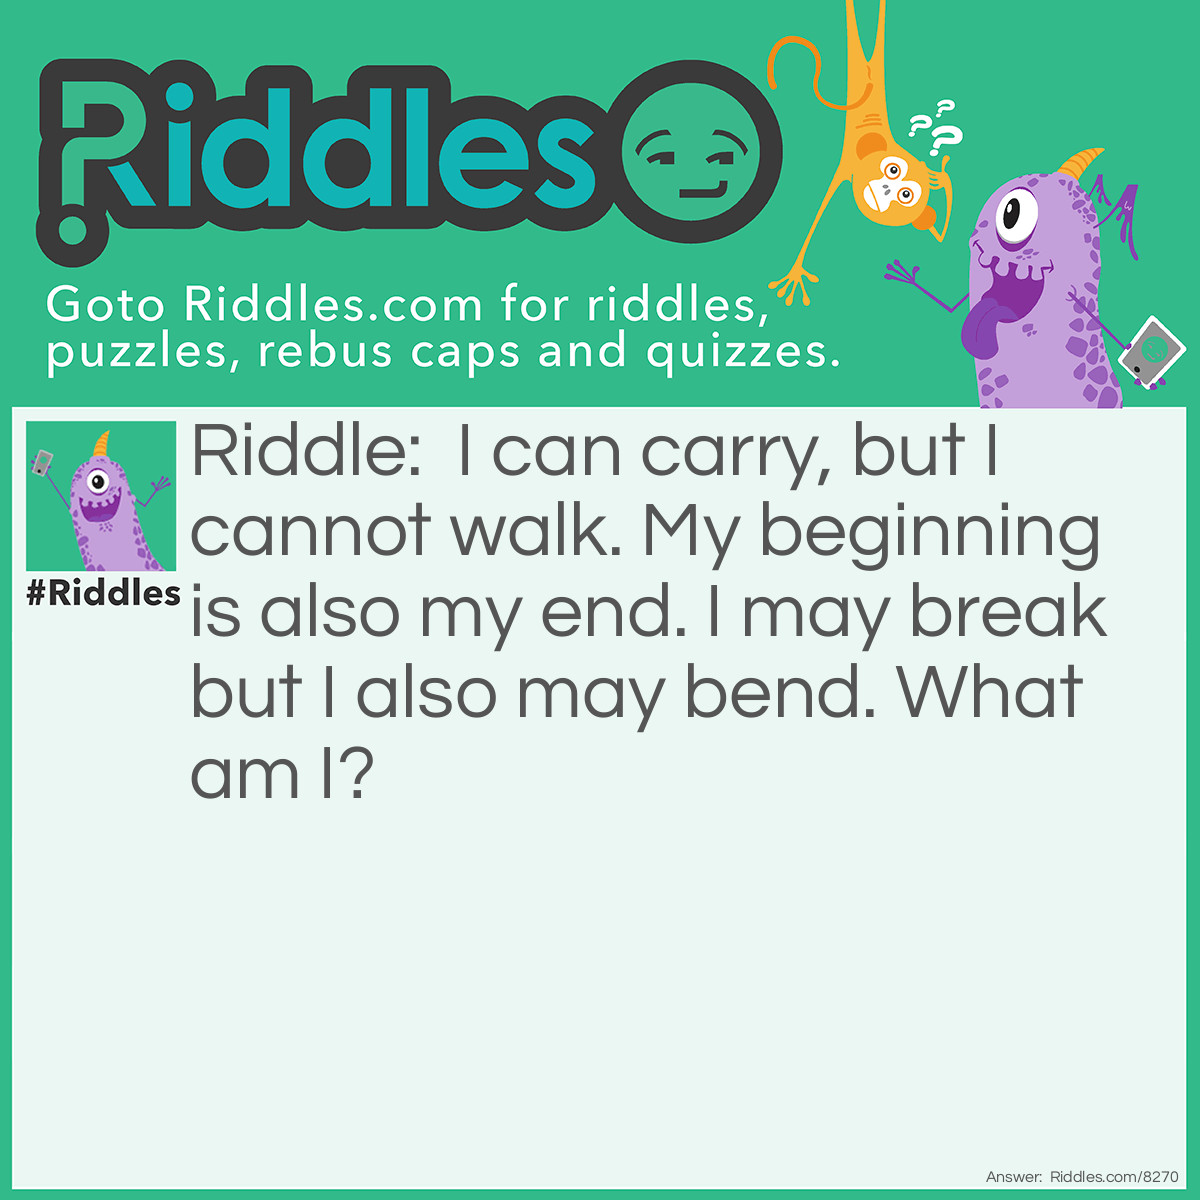 Riddle: I can carry, but I cannot walk. My beginning is also my end. I may break but I also may bend. What am I? Answer: A bridge.